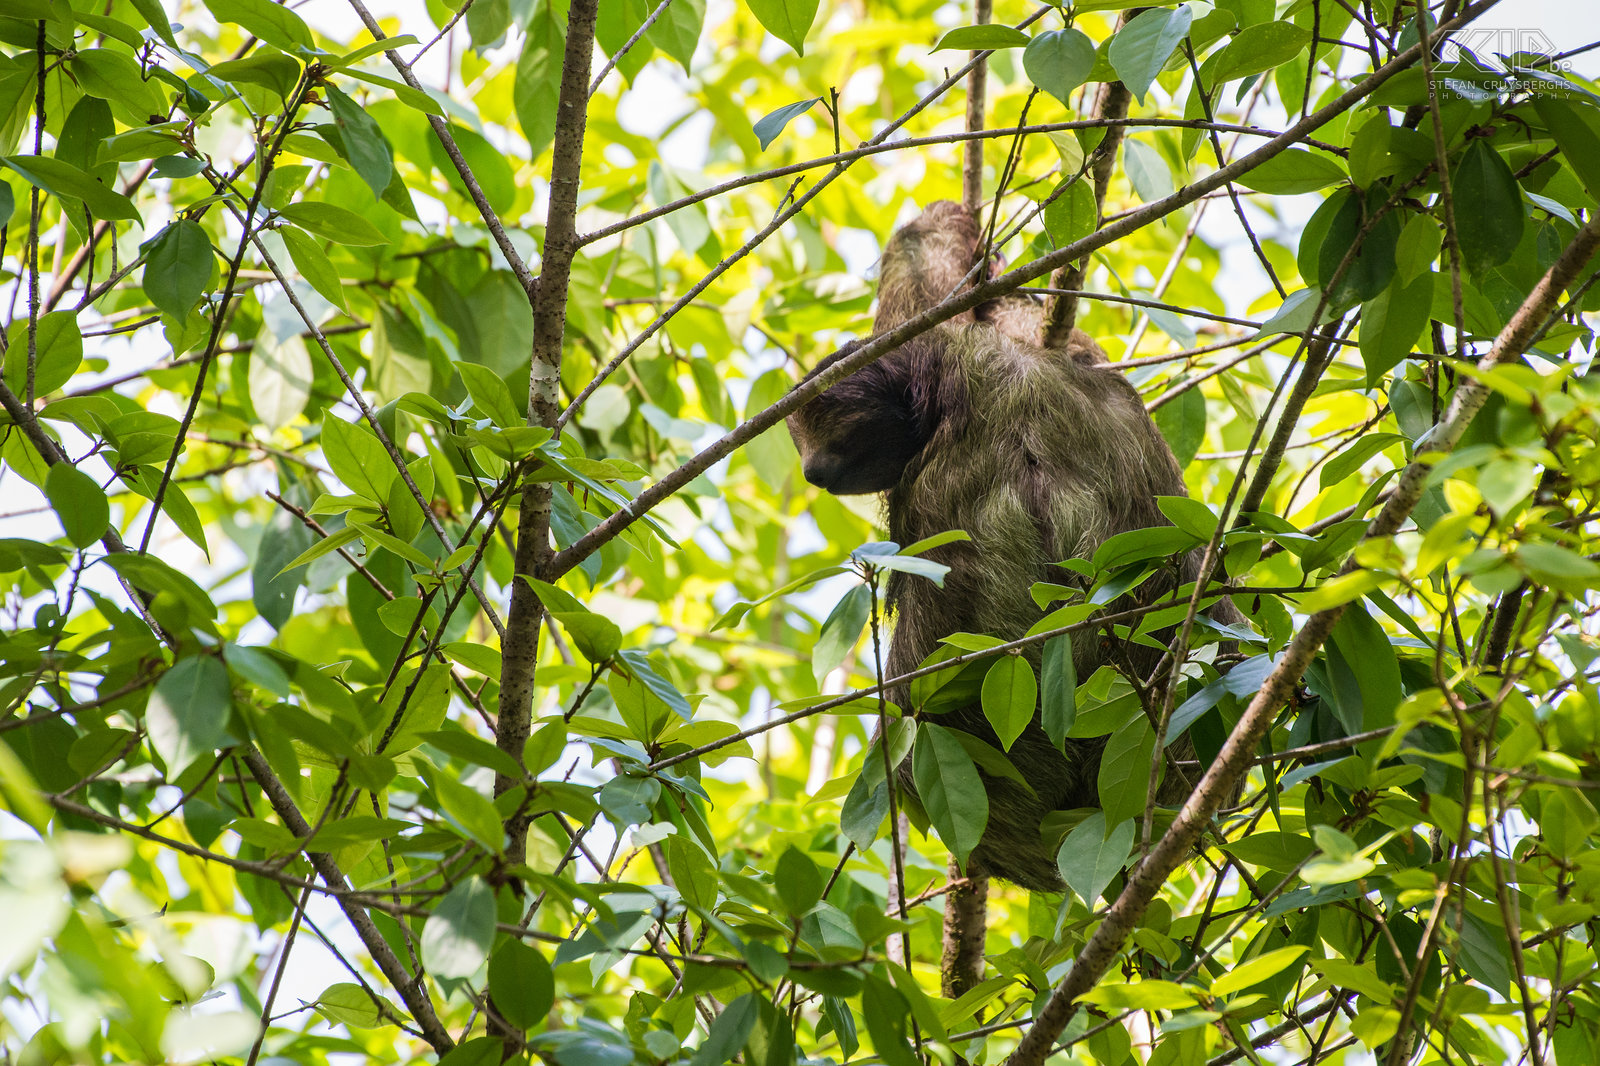 La Selva - Three-toed sloth A three-toed sloth (bradypus) in the jungle of La Selva Biological station in Costa Rica. These sloths have short tails of 6-7 cm and  three clawed toes on each limb. Their body is adapted to hang by their limbs and they move very slow. They move between different trees up to four times a day, although they prefer to keep to a particular type of tree.<br />
 Stefan Cruysberghs